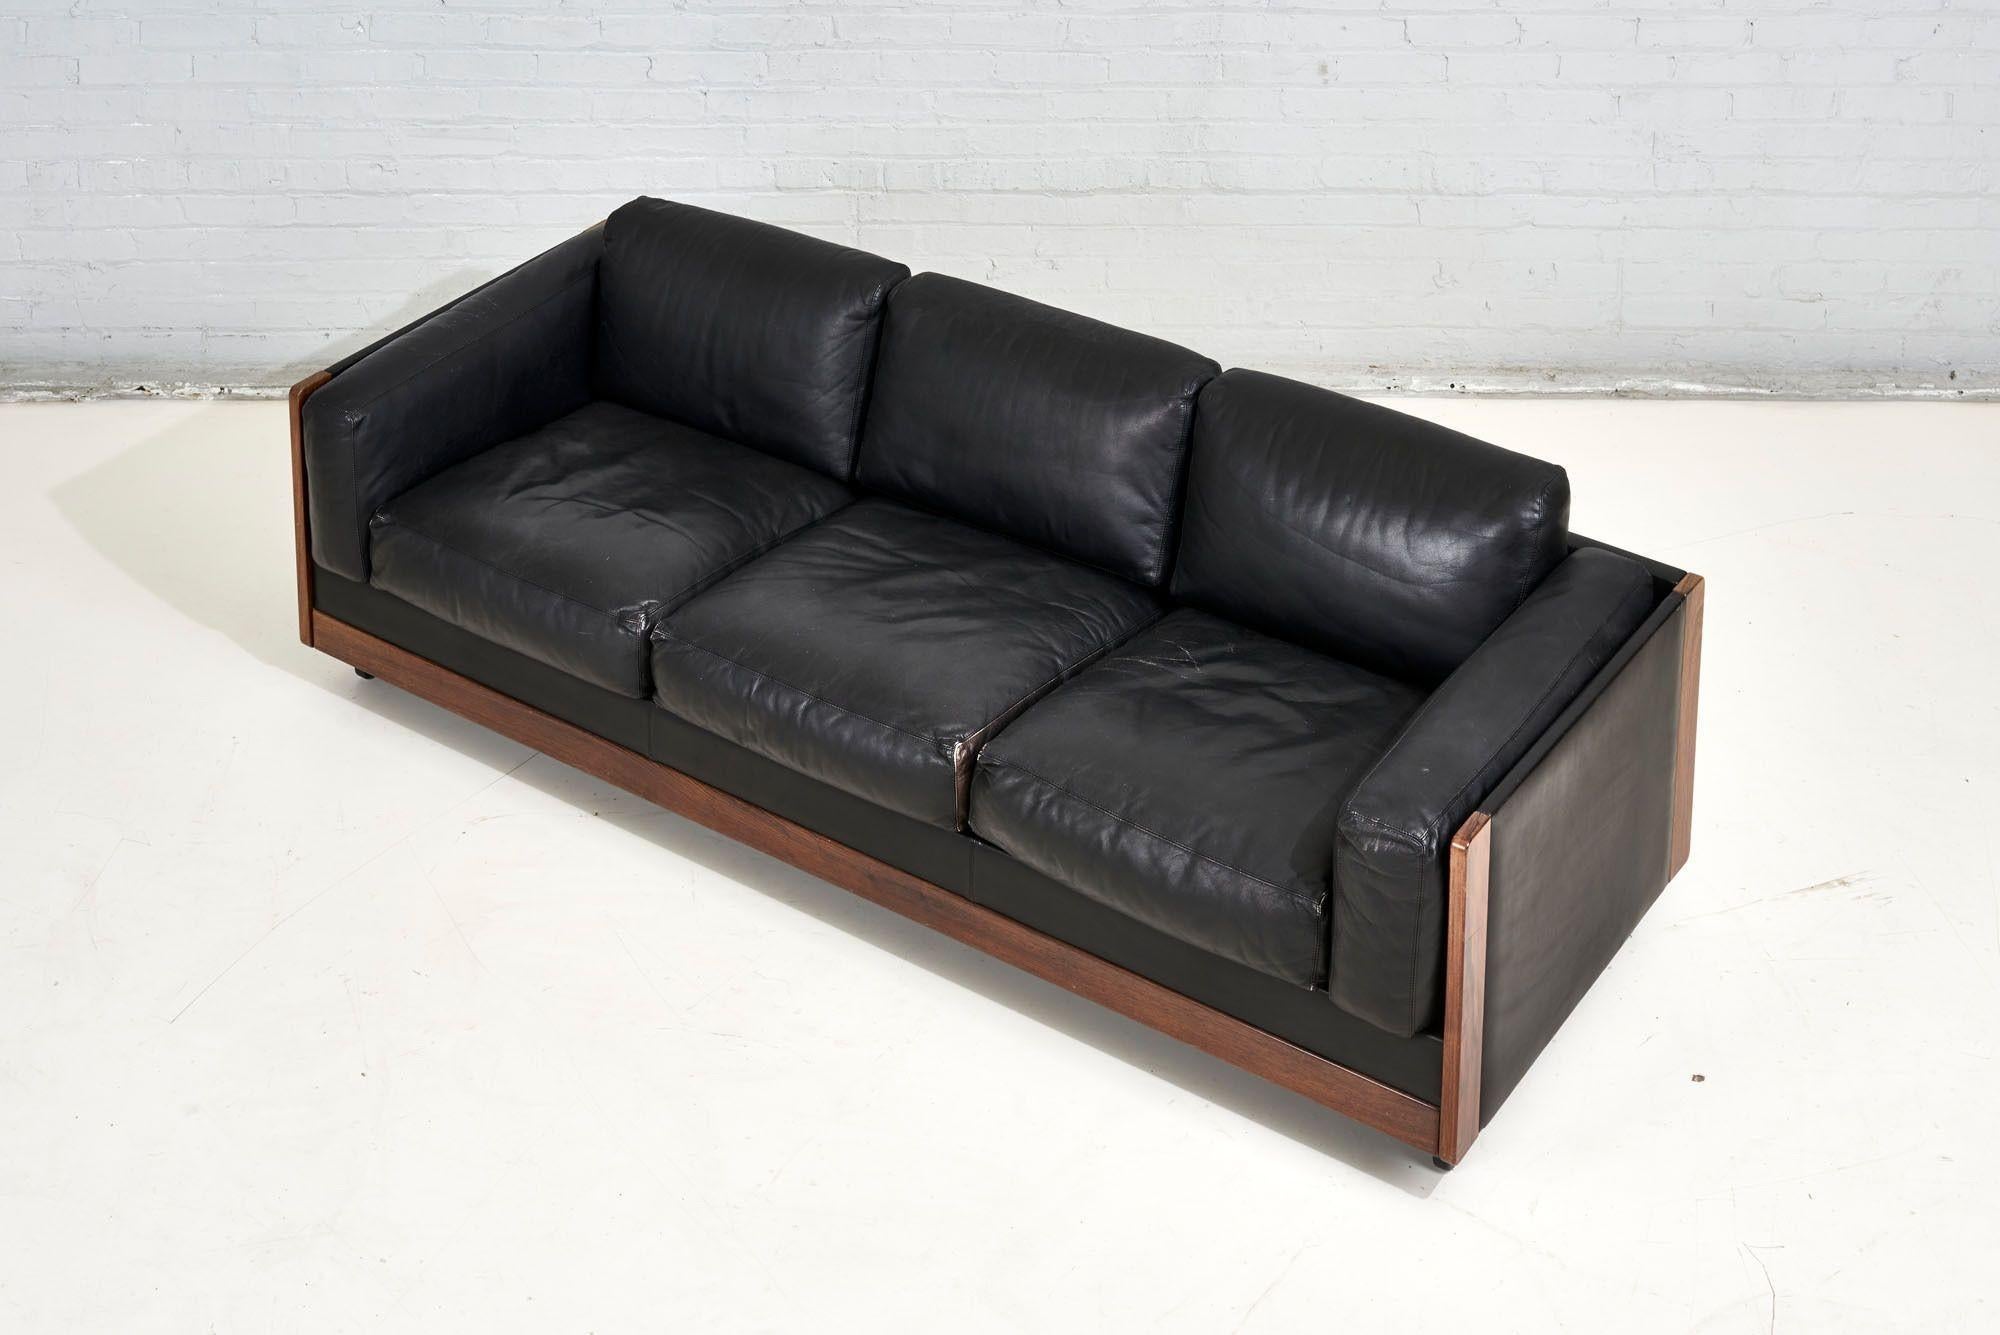 American Black Leathe/Rosewood “920 Sofa”, Afra & Tobia Scarpa for Cassina, Italy 1960 For Sale